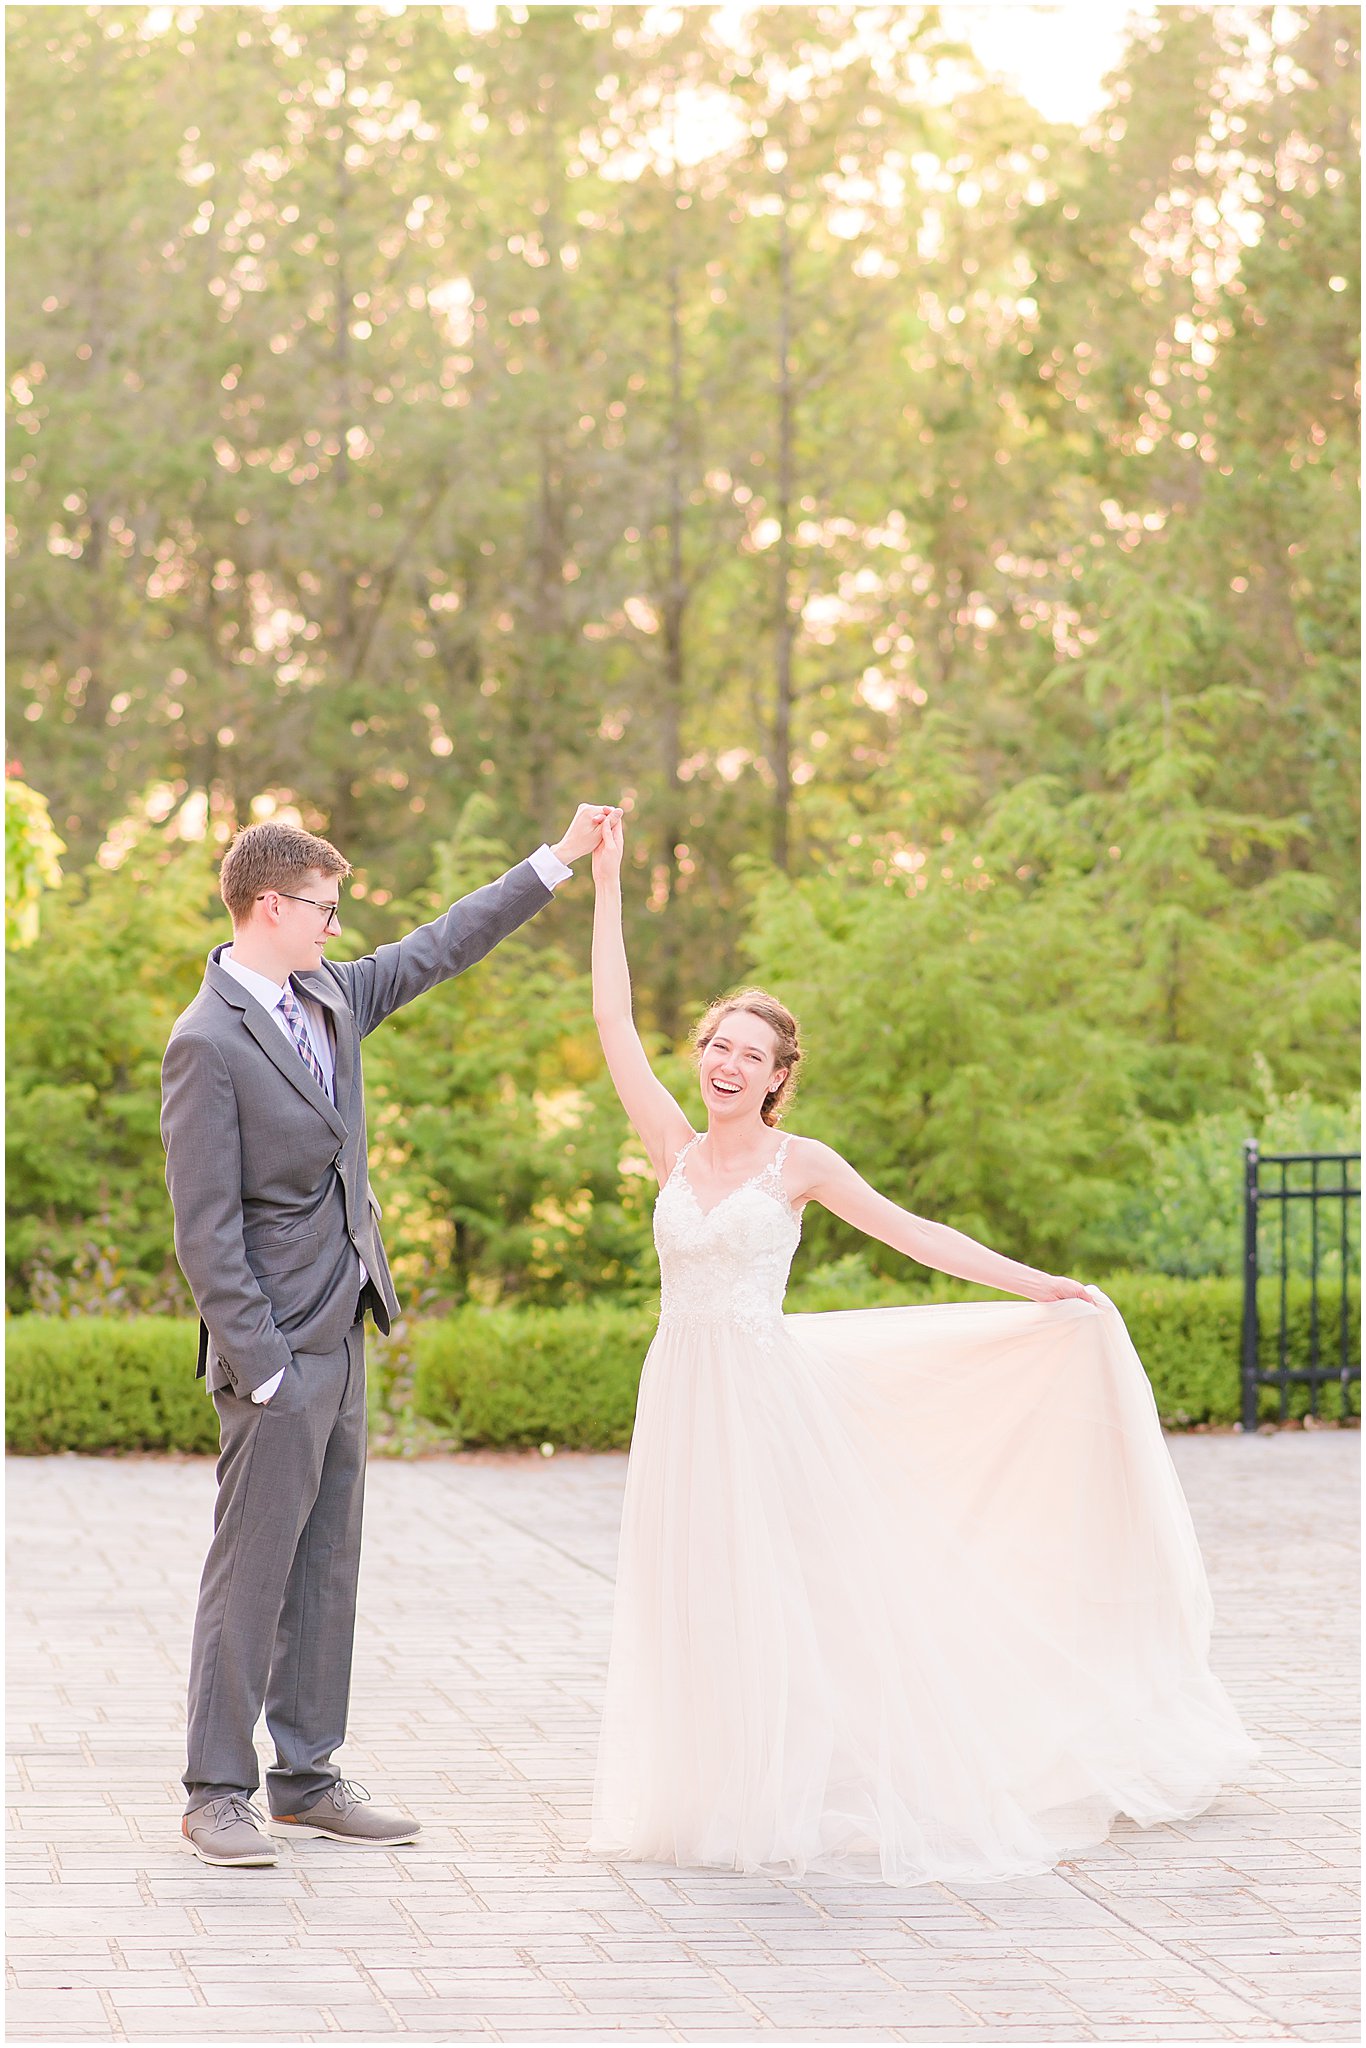 Bride laughing and twirling dress during Coxhall Gardens wedding